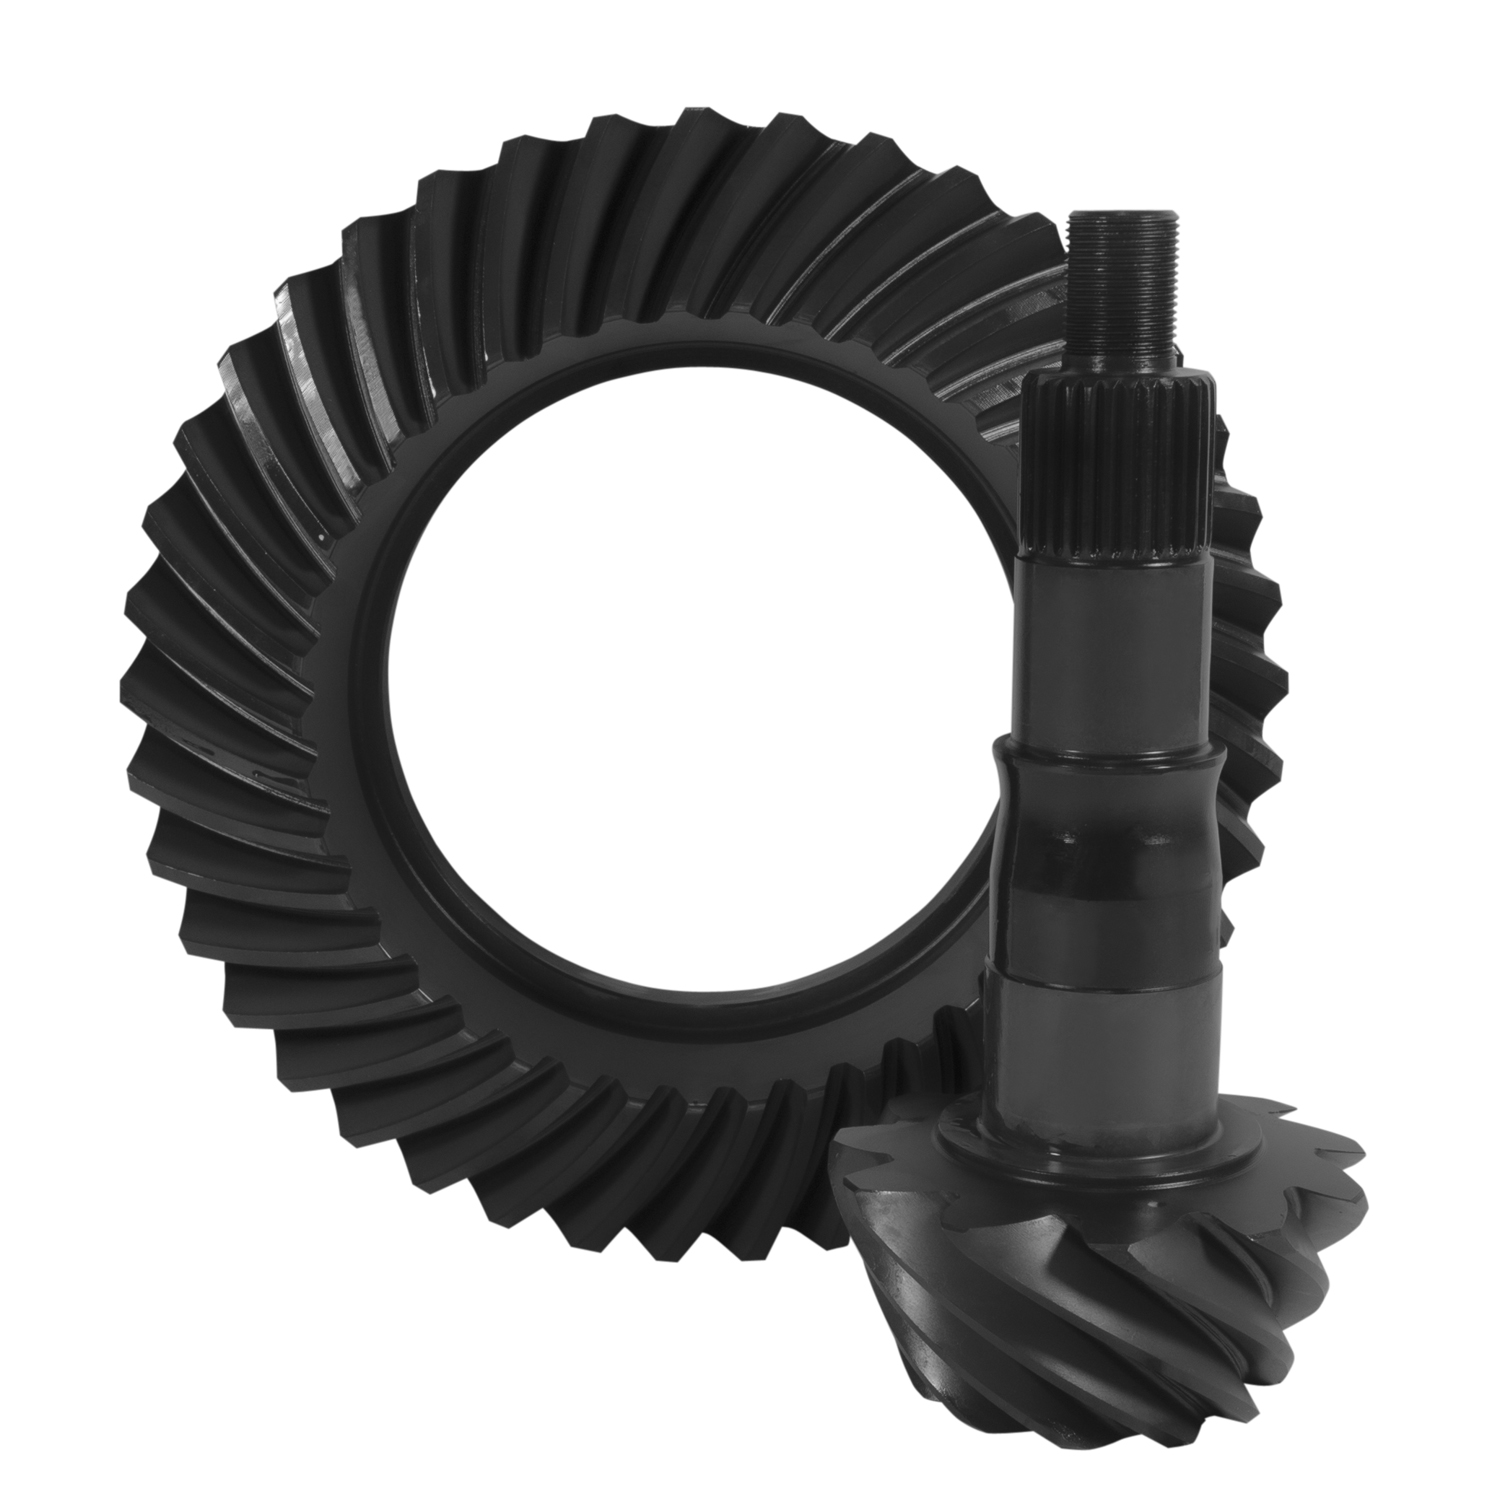 USA Standard Ring & Pinion gear set for Ford 8.8" in a 5.13 ratio